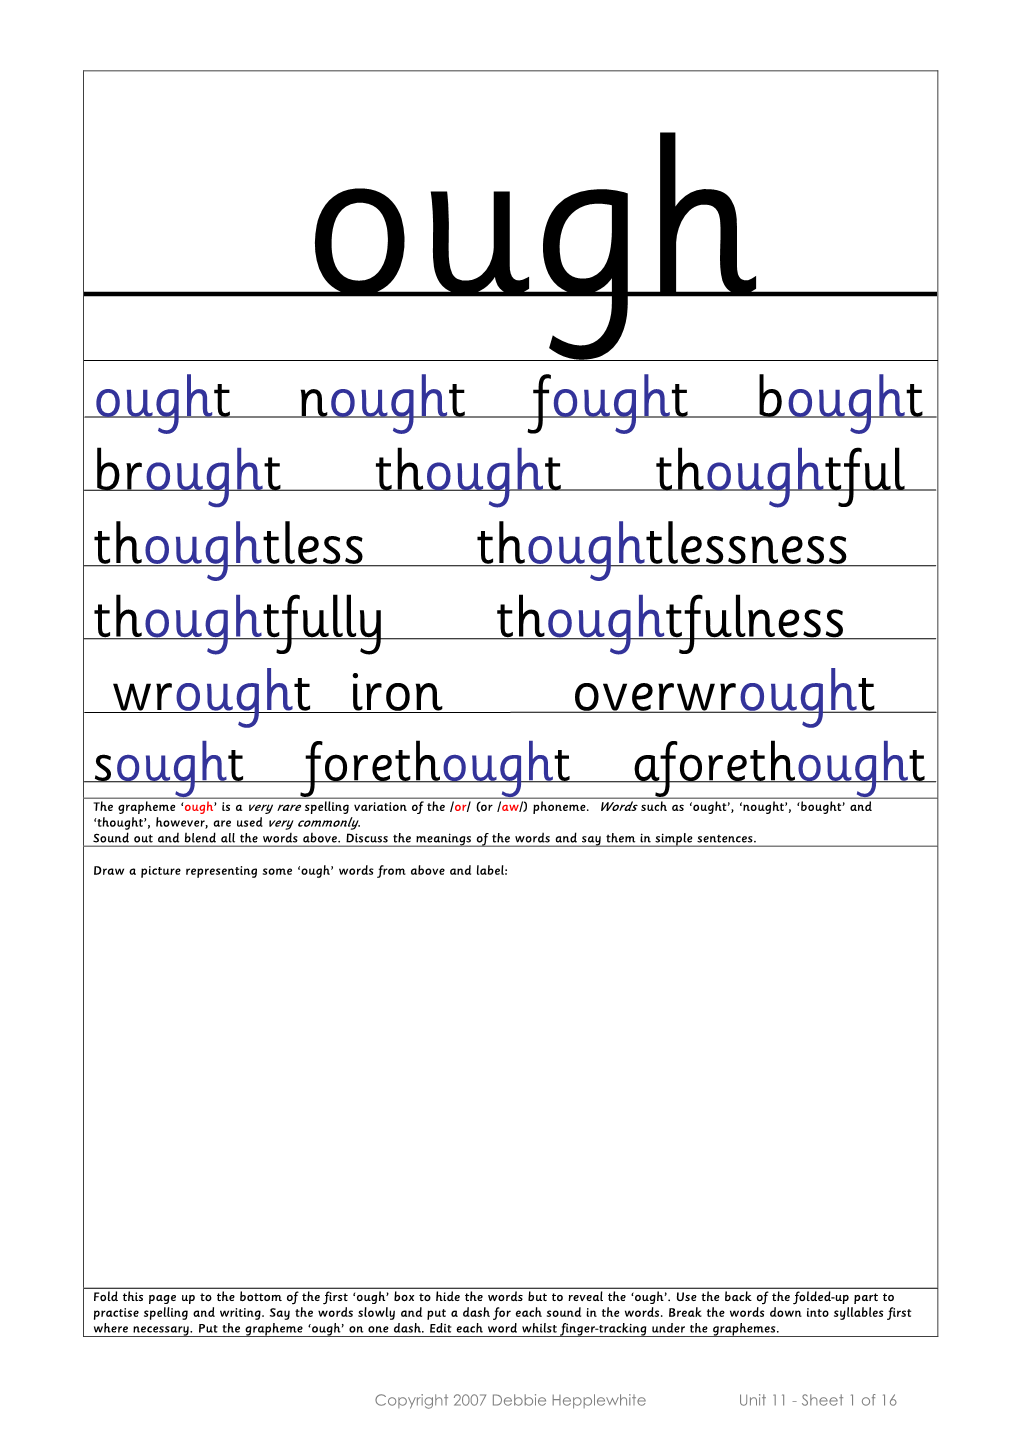 Ought Nought Fought Bought Brought Thought Thoughtful Thoughtless